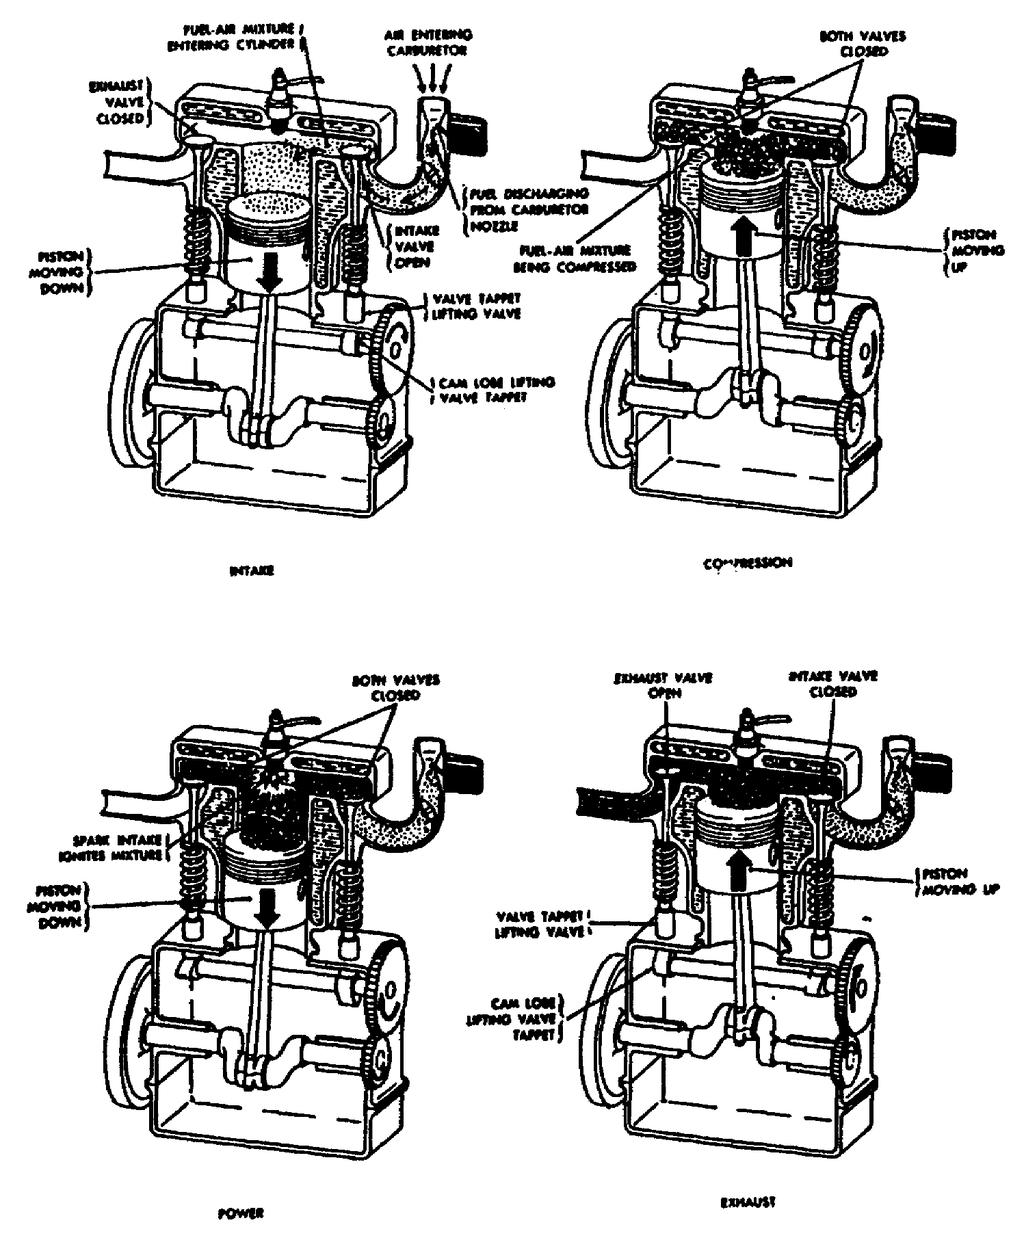 (5) Horizontal Opposed with Vertical Crankshaft. In this engine, the cylinders are horizontal and opposed to each other, but the crankshafts set vertically. 3. Engine Operation.